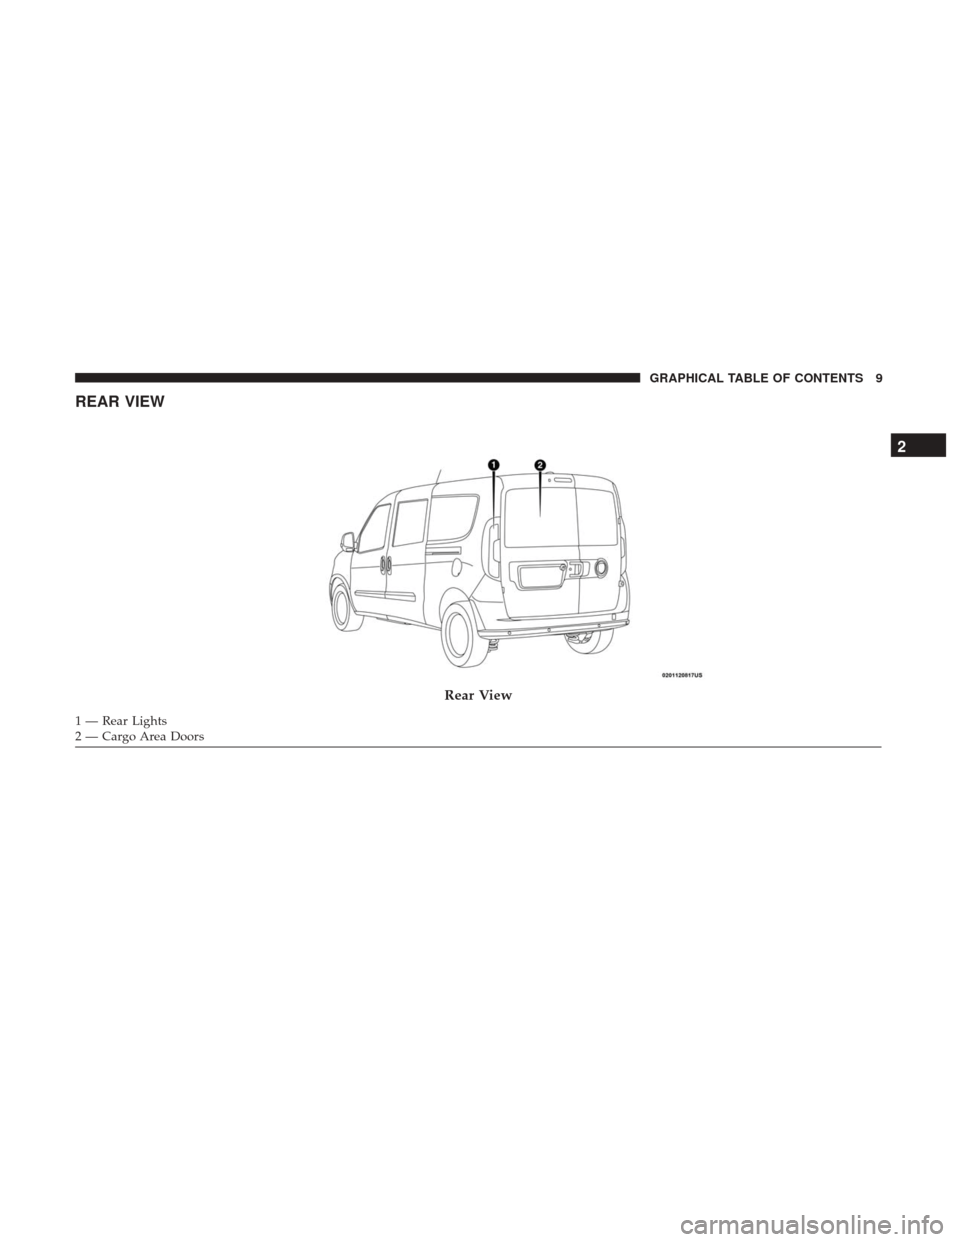 Ram ProMaster City 2019  Owners Manual REAR VIEW
Rear View
1 — Rear Lights
2 — Cargo Area Doors
2
GRAPHICAL TABLE OF CONTENTS 9 